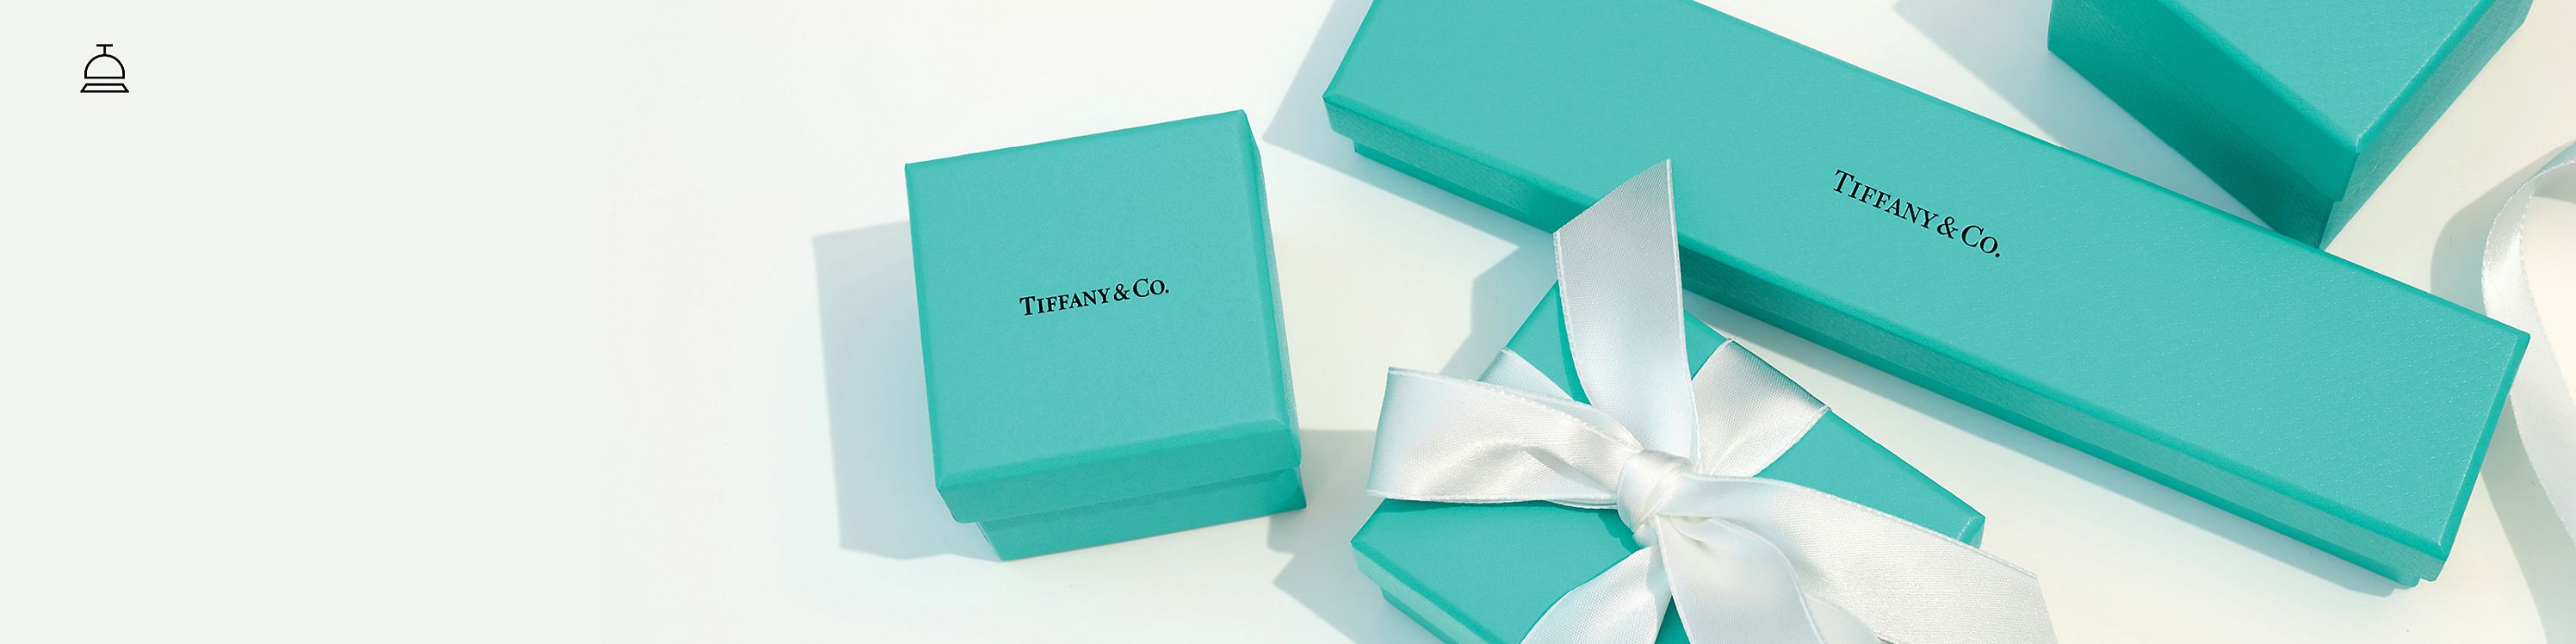 Client Care Tiffany Co